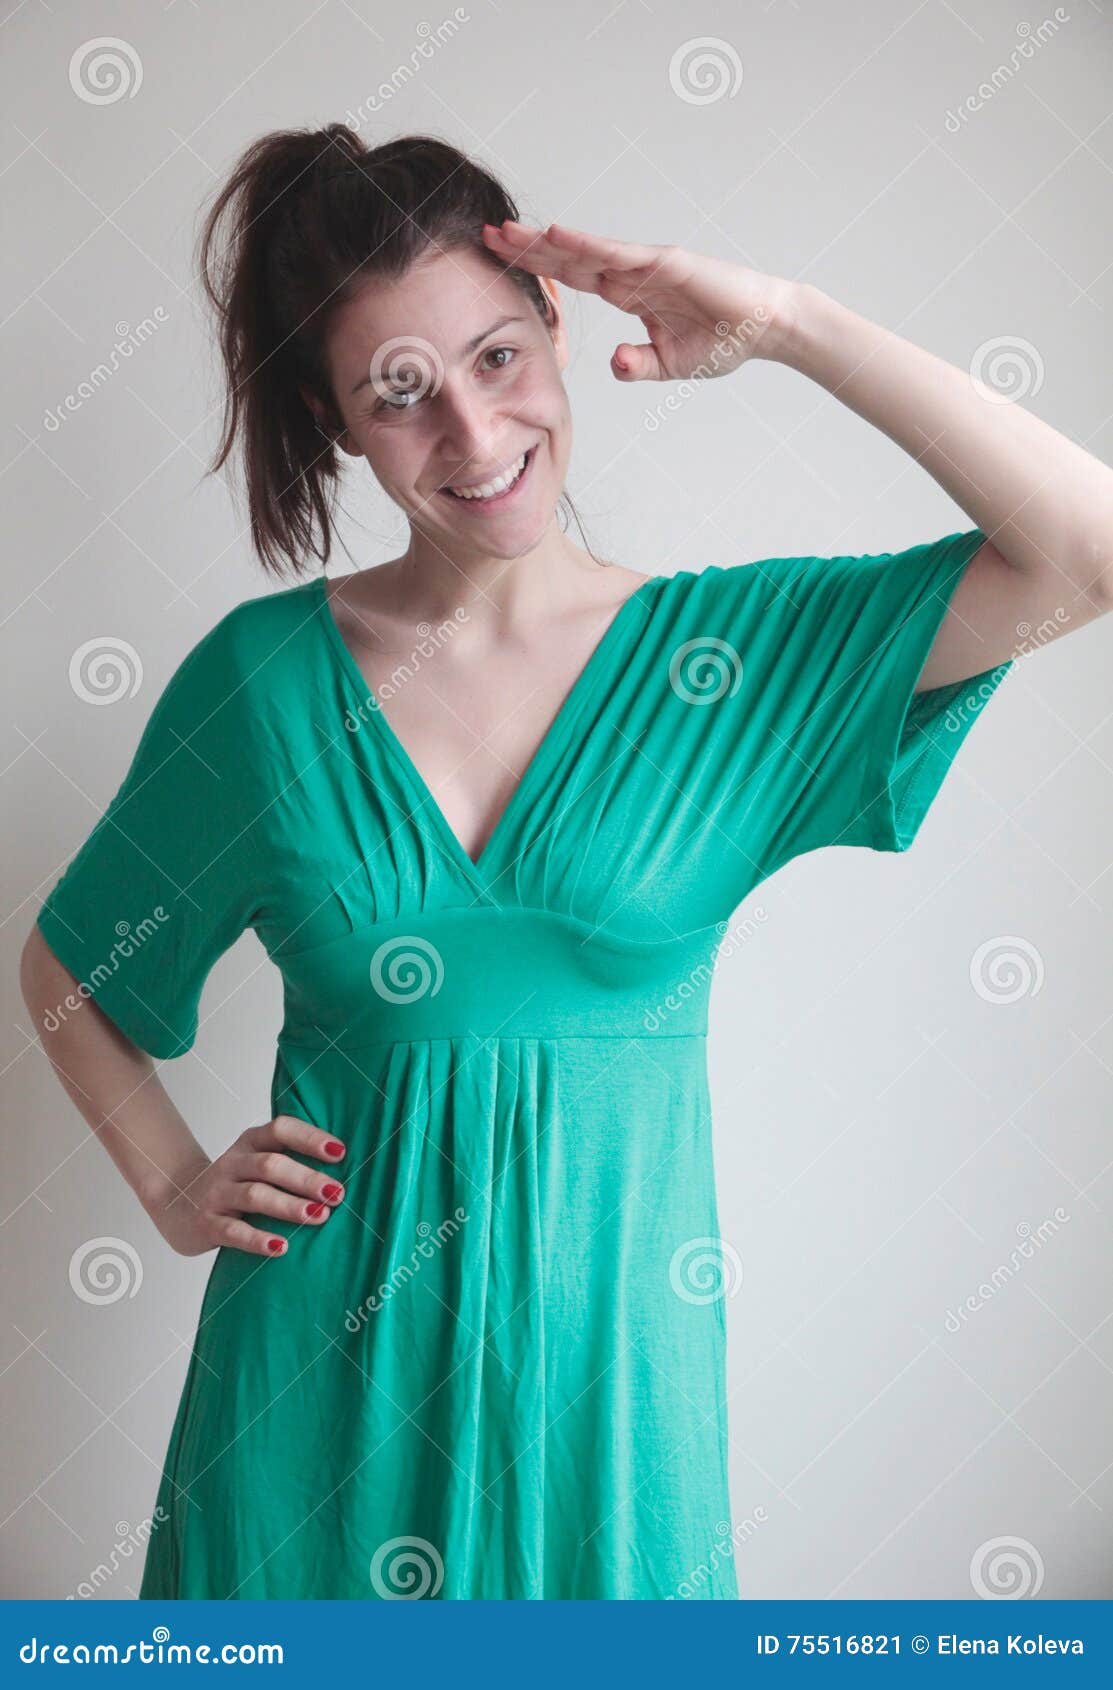 young woman posing for military salute